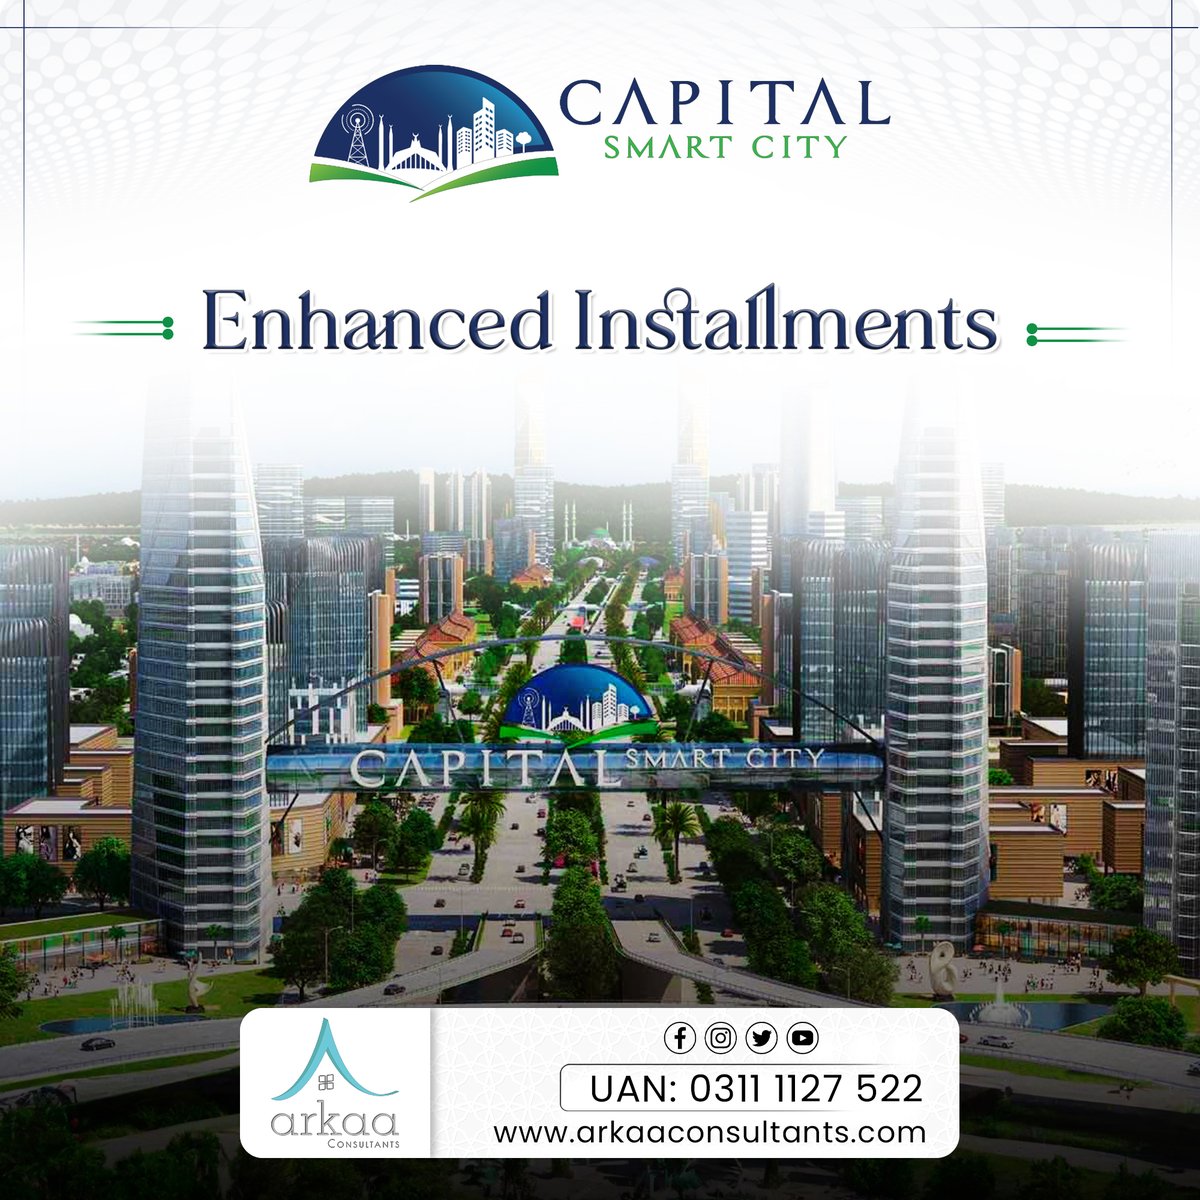 Residents at Capital Smart City are offered advanced traveling solutions

#capitalsmartcity #arkaaconsultants #smartinterchange #SmartCities #CSC  #csc #islamabad #CapitalSmartCityIslamabad #smartparkingsystem #intelligenttrafficmanagementsystem #publictransportation